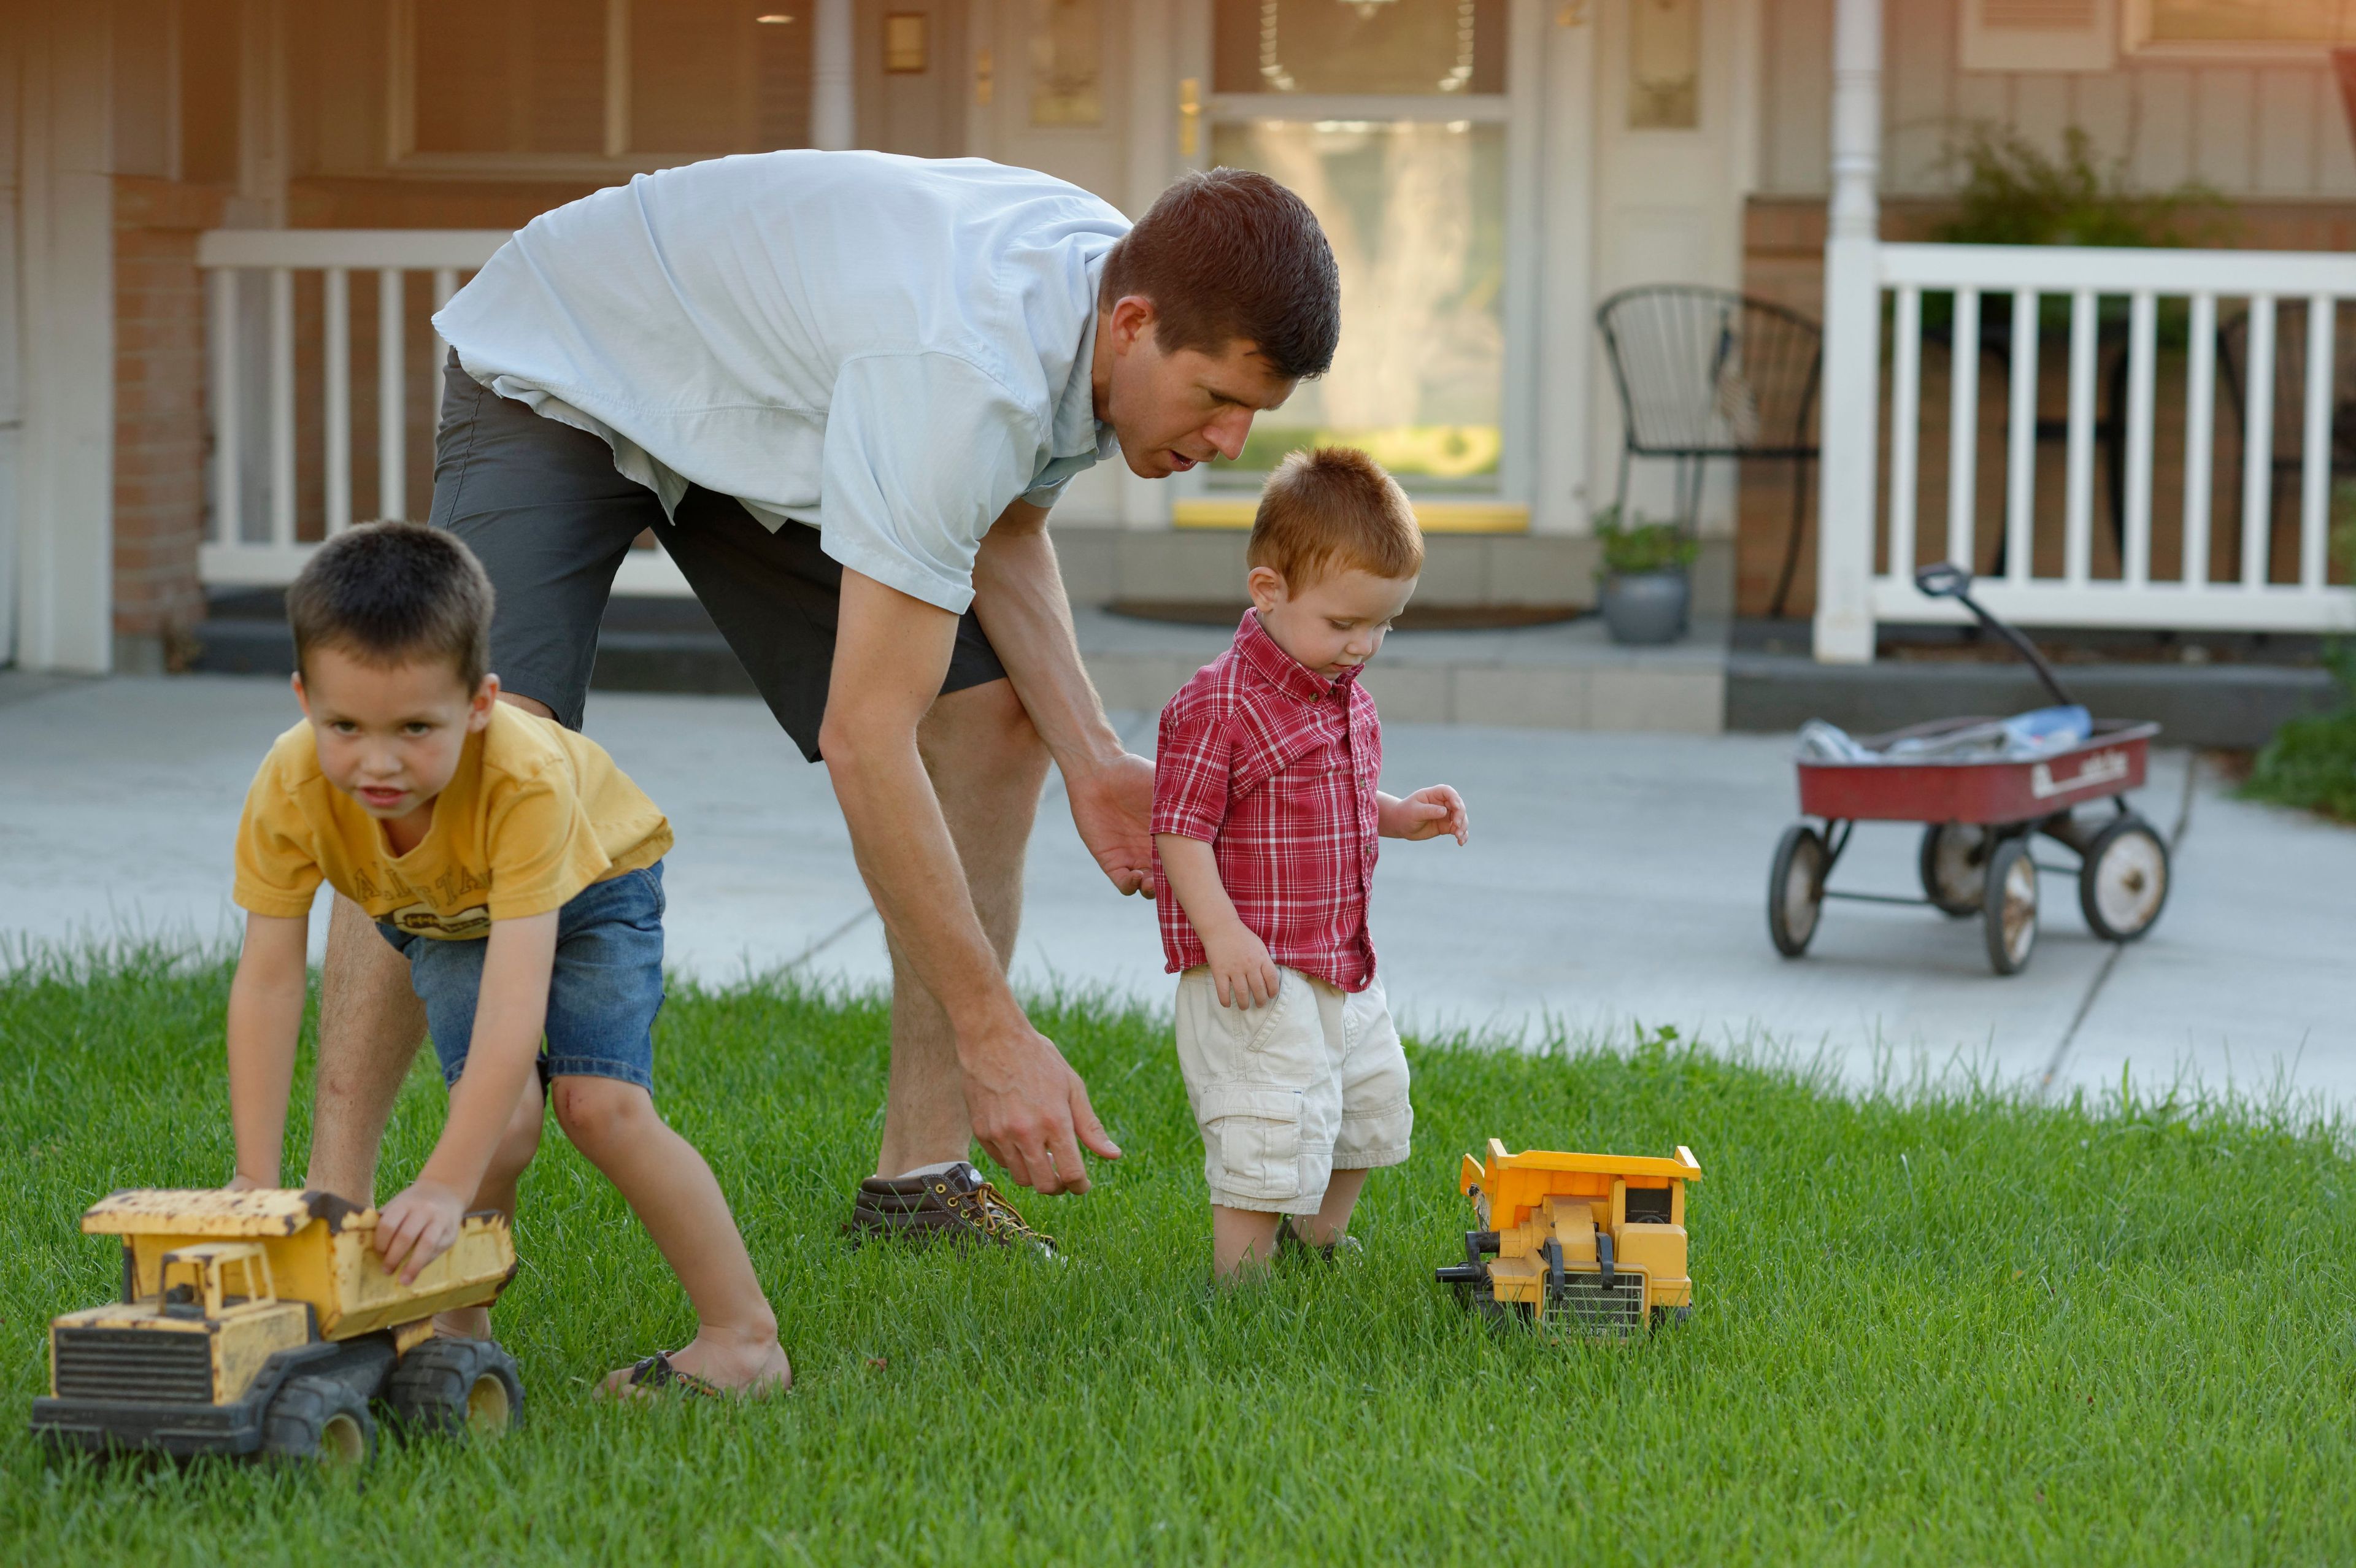 A father plays with his two sons outside in their yard.